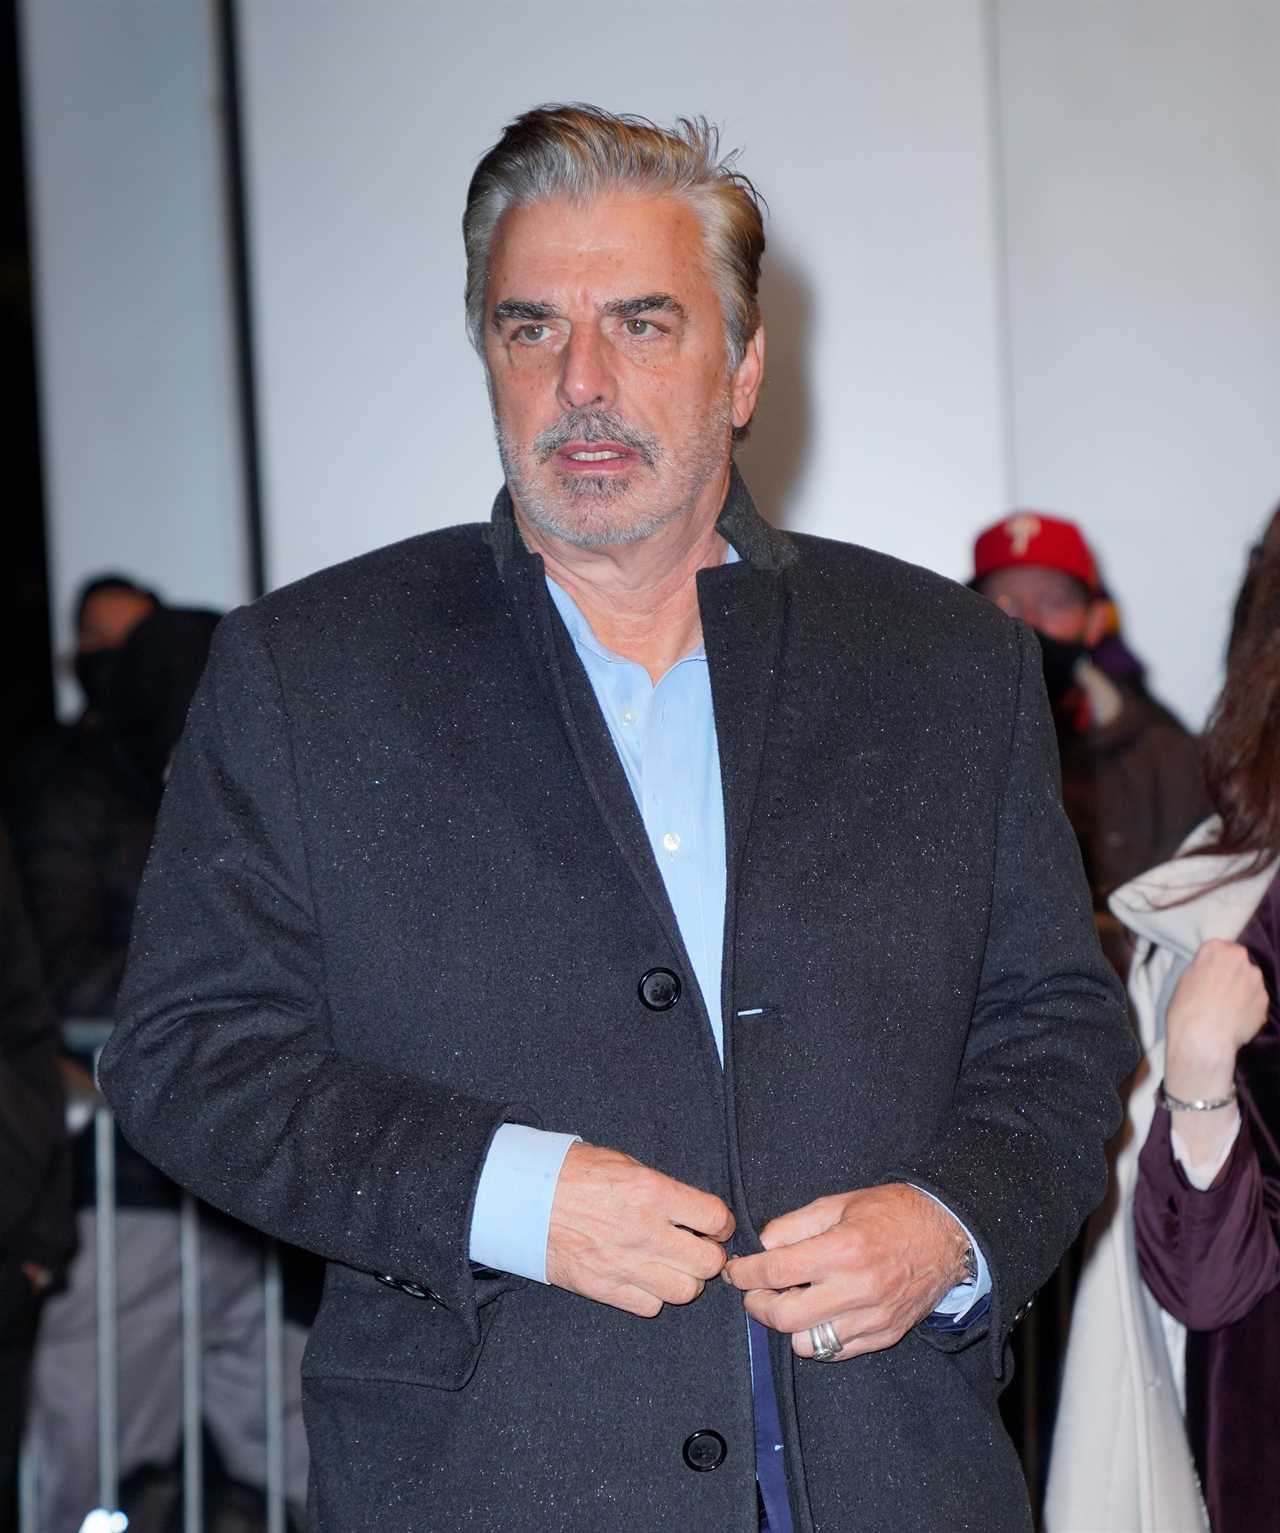 Sex And The Citys Chris Noth Accused Of Sexual Misconduct 